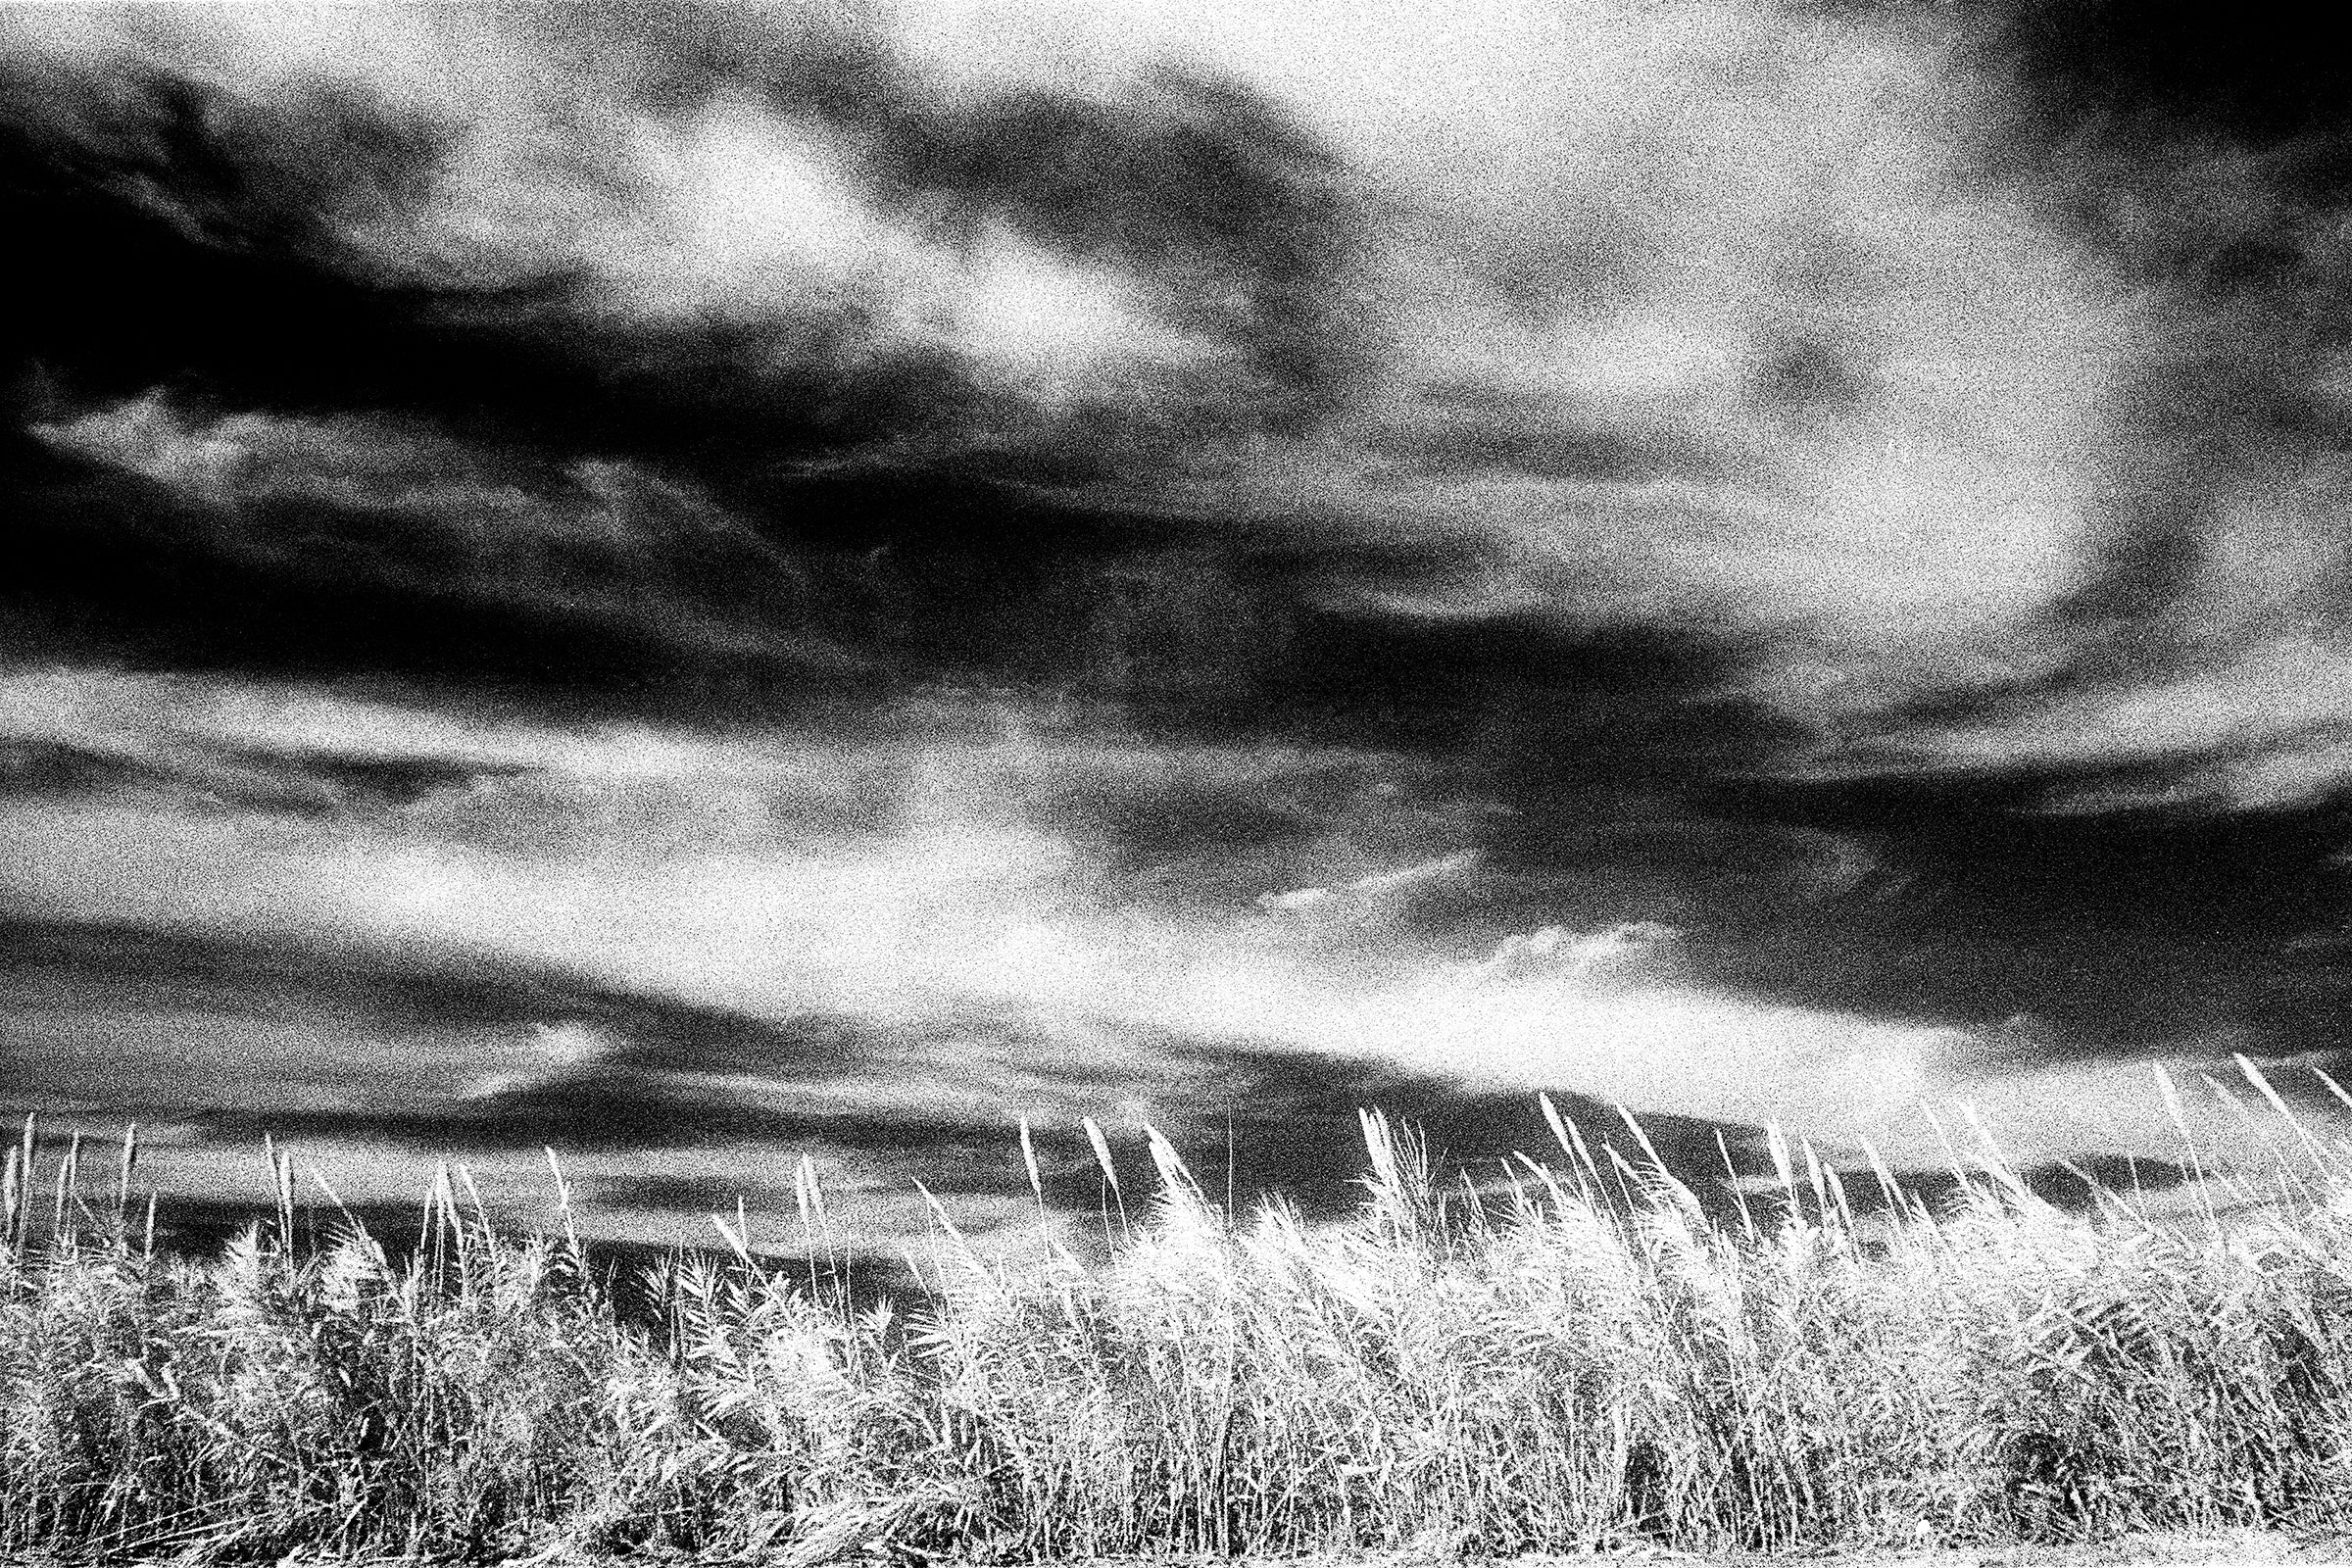 black and white photo of long clouds and plants with stalks in the foreground